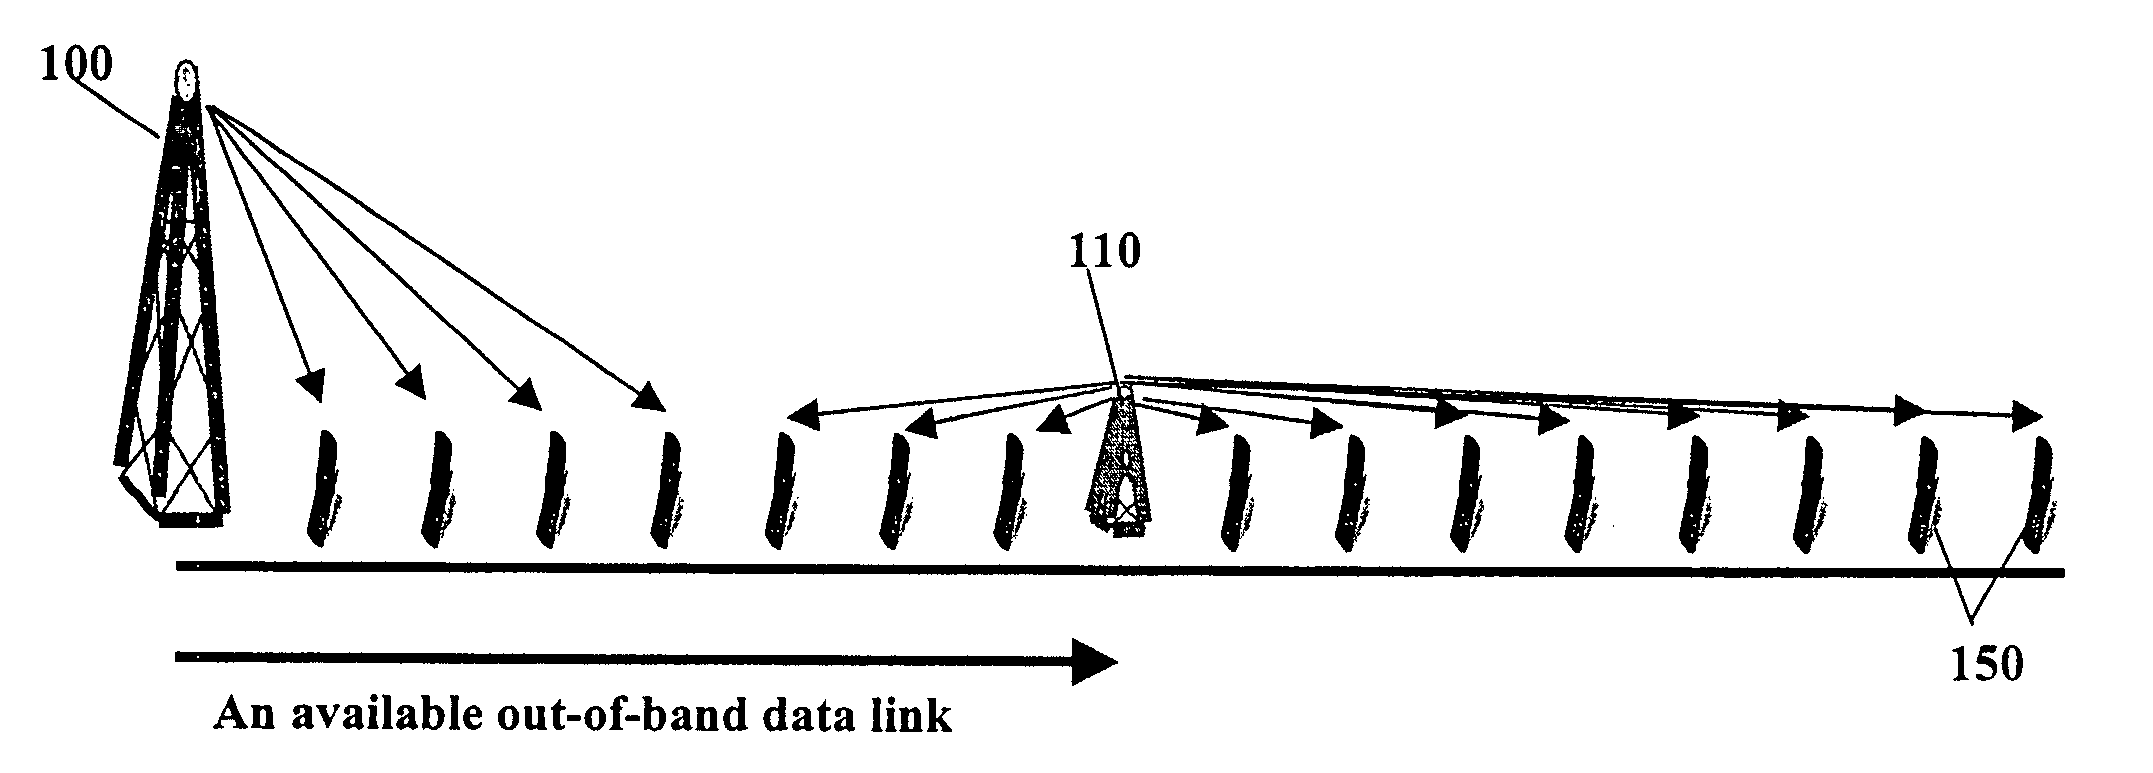 Method and system for a remote downlink transmitter for increasing the capacity and downlink capability of a multiple access interference limited spread-spectrum wireless network